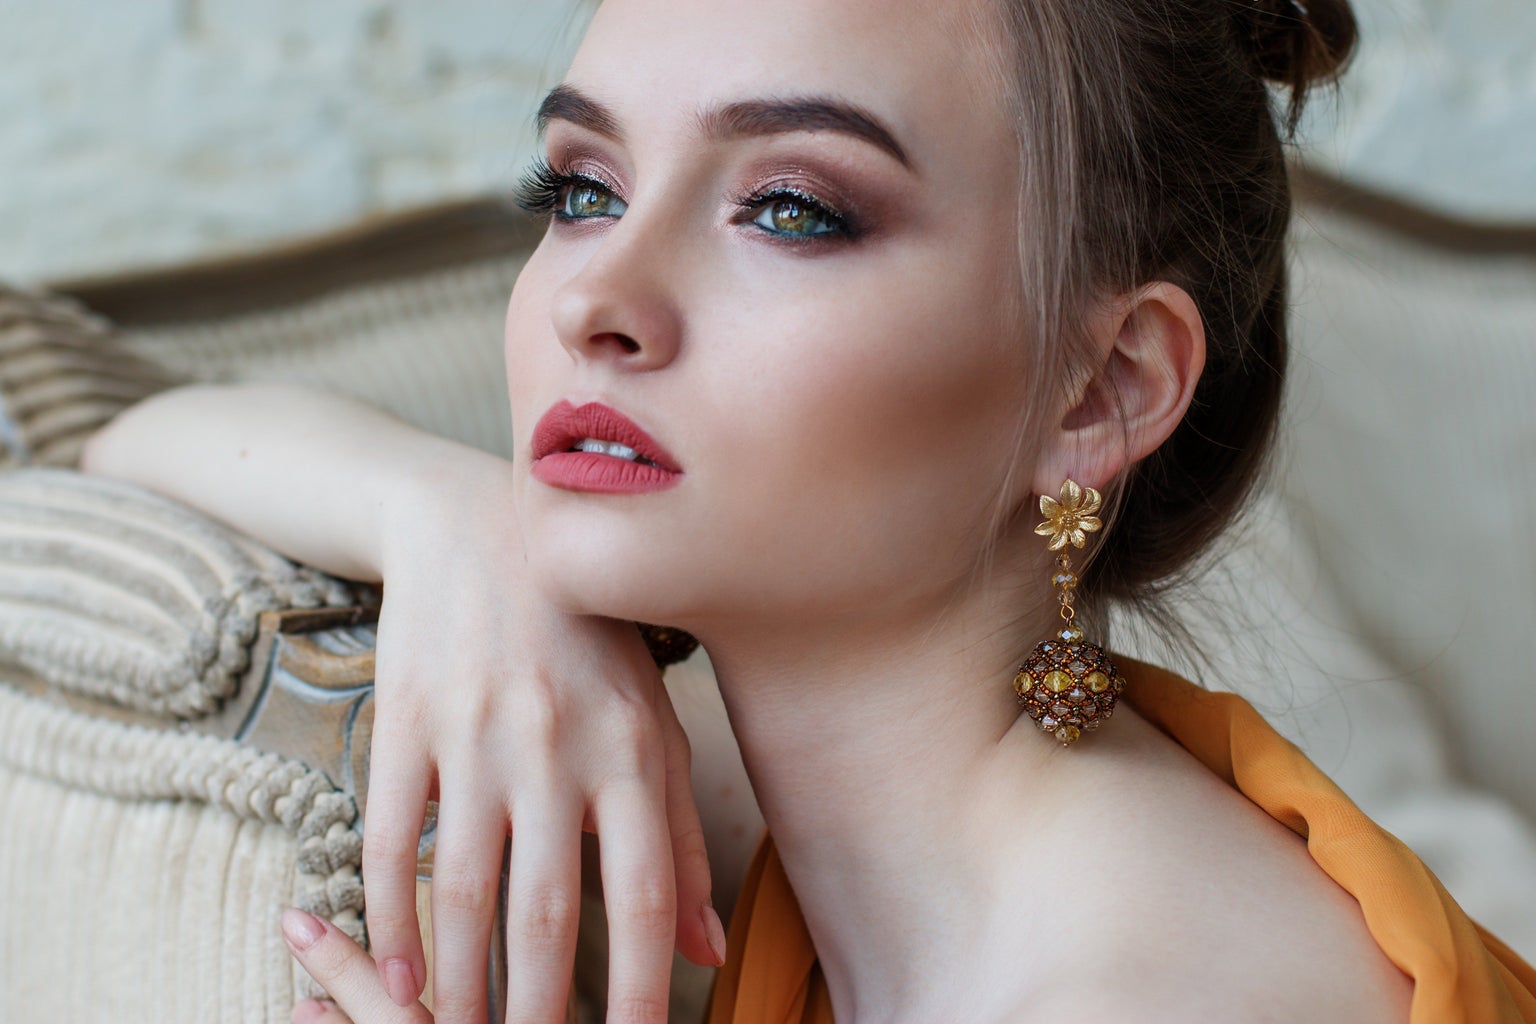 Woman in makeup looking into distance, pretty eyes